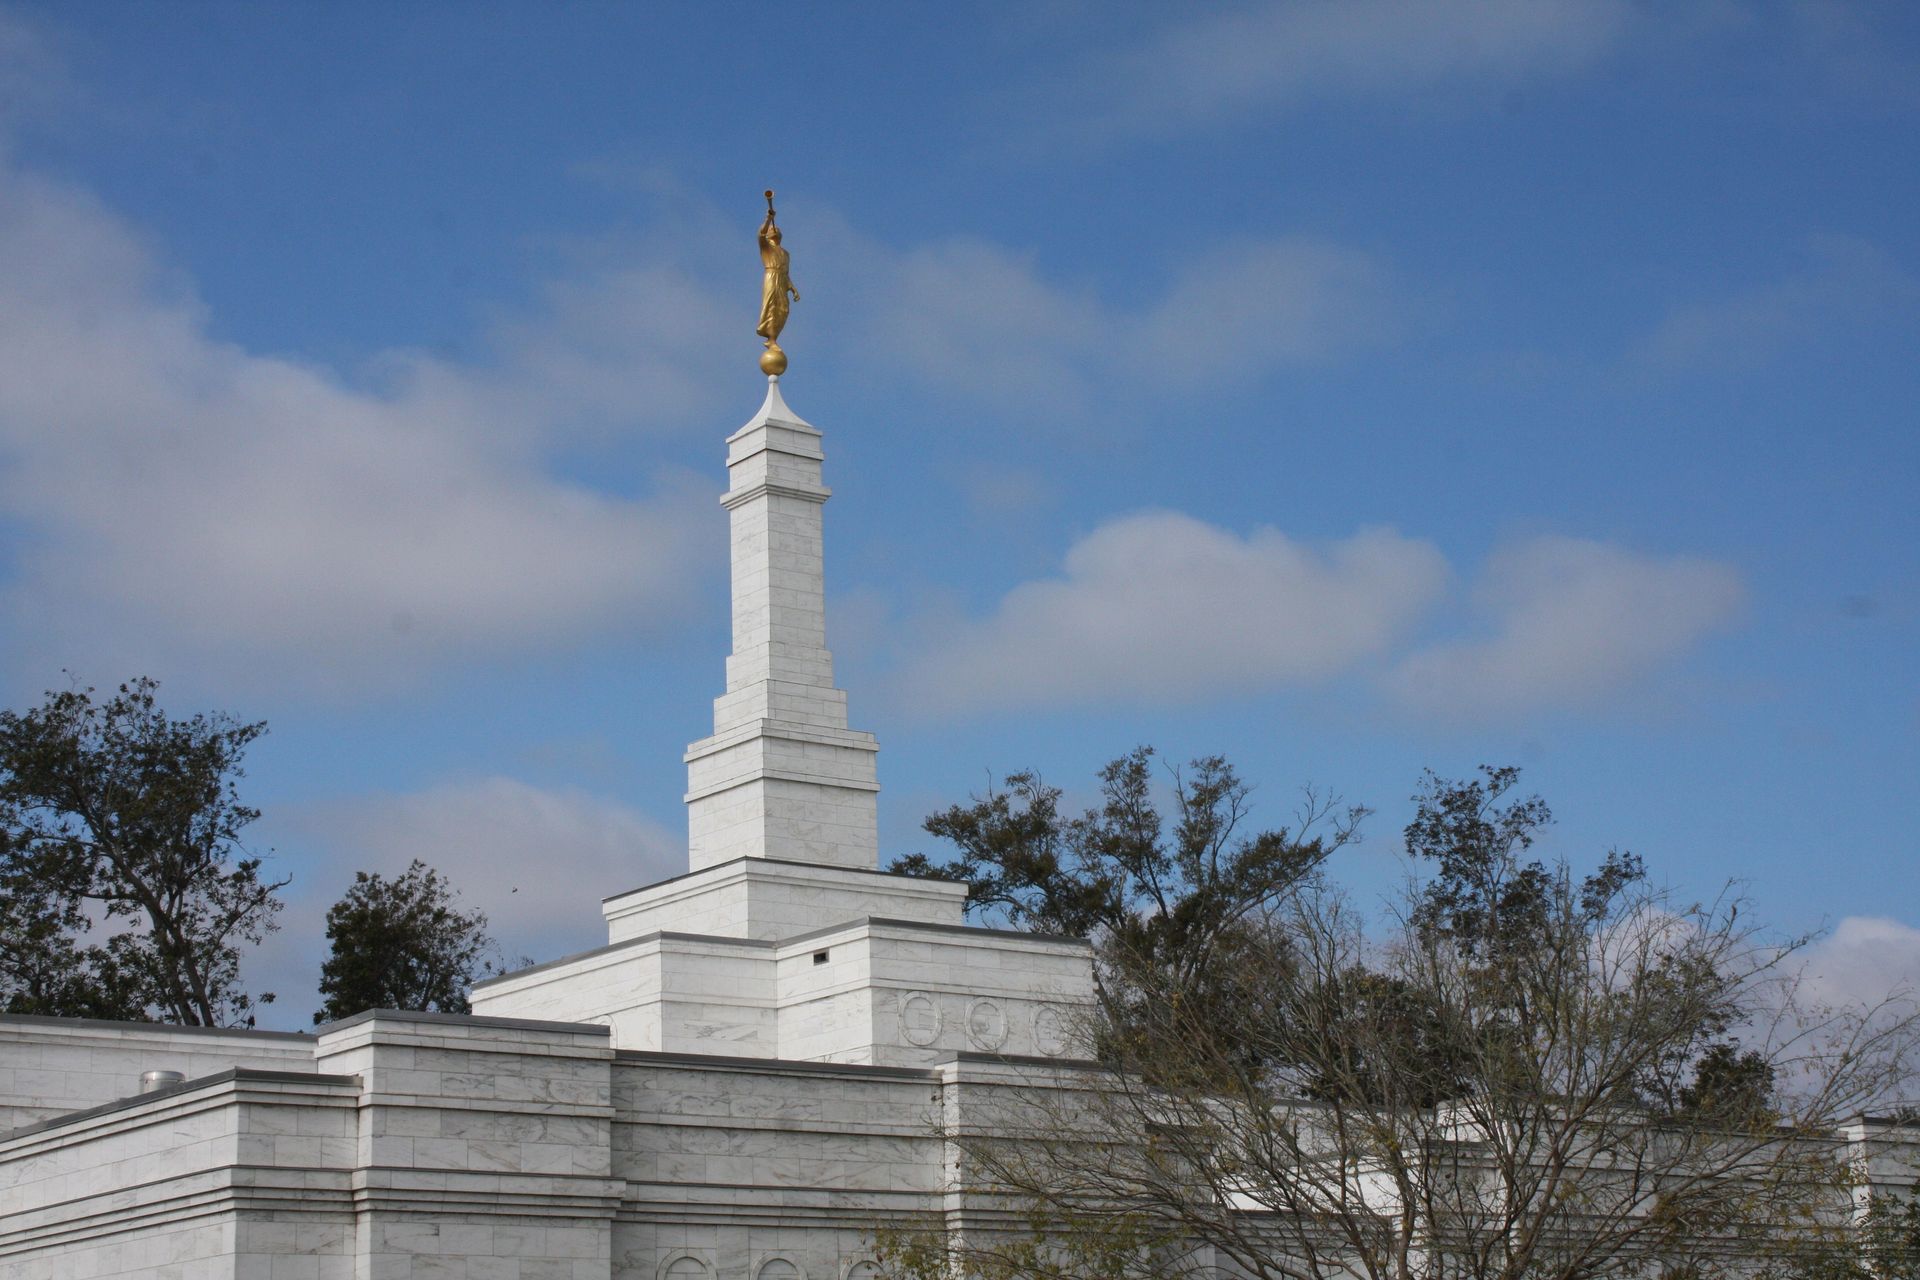 A side view of the Baton Rouge Louisiana Temple.